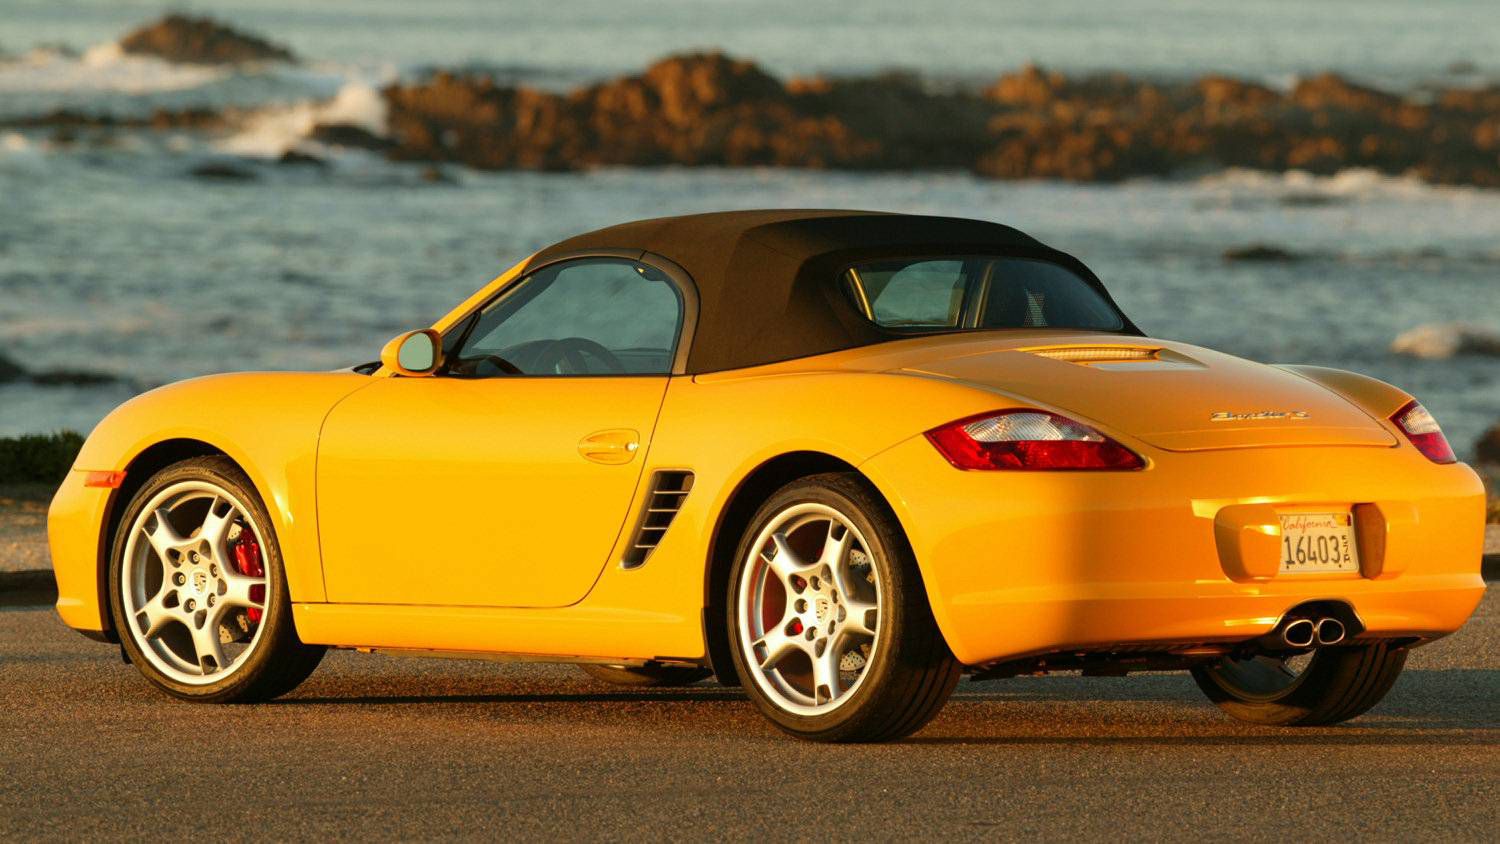 Porsche Boxster S (2007) – Specifications